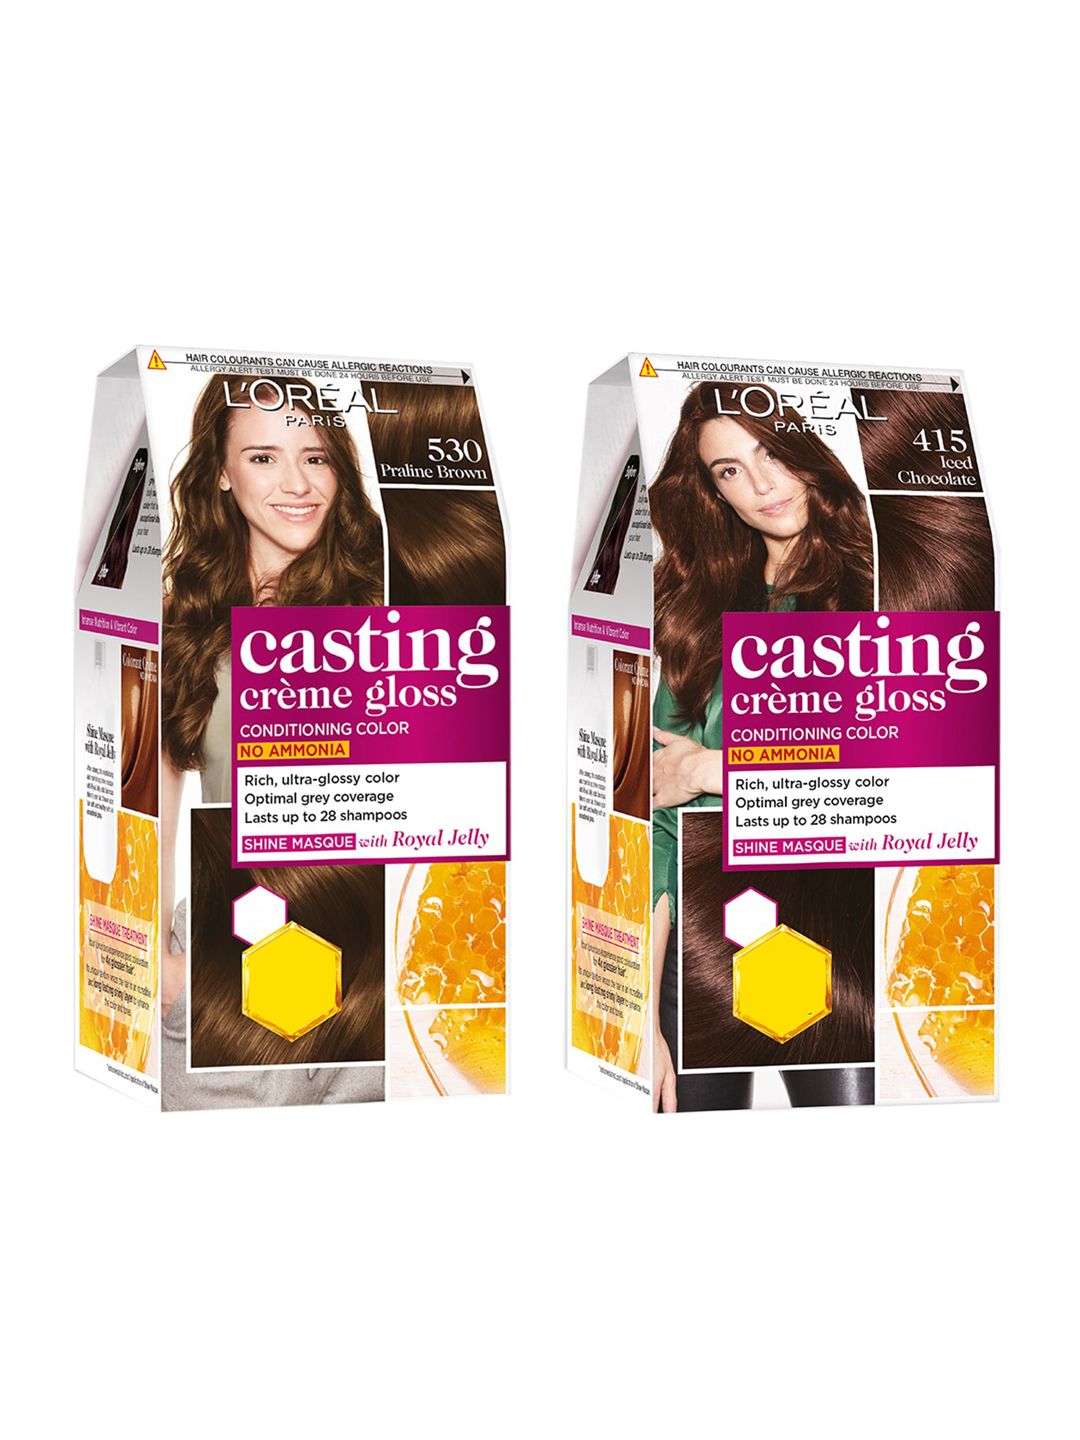 LOreal Paris Set of 2 Casting Creme Gloss Hair Colour Price in India